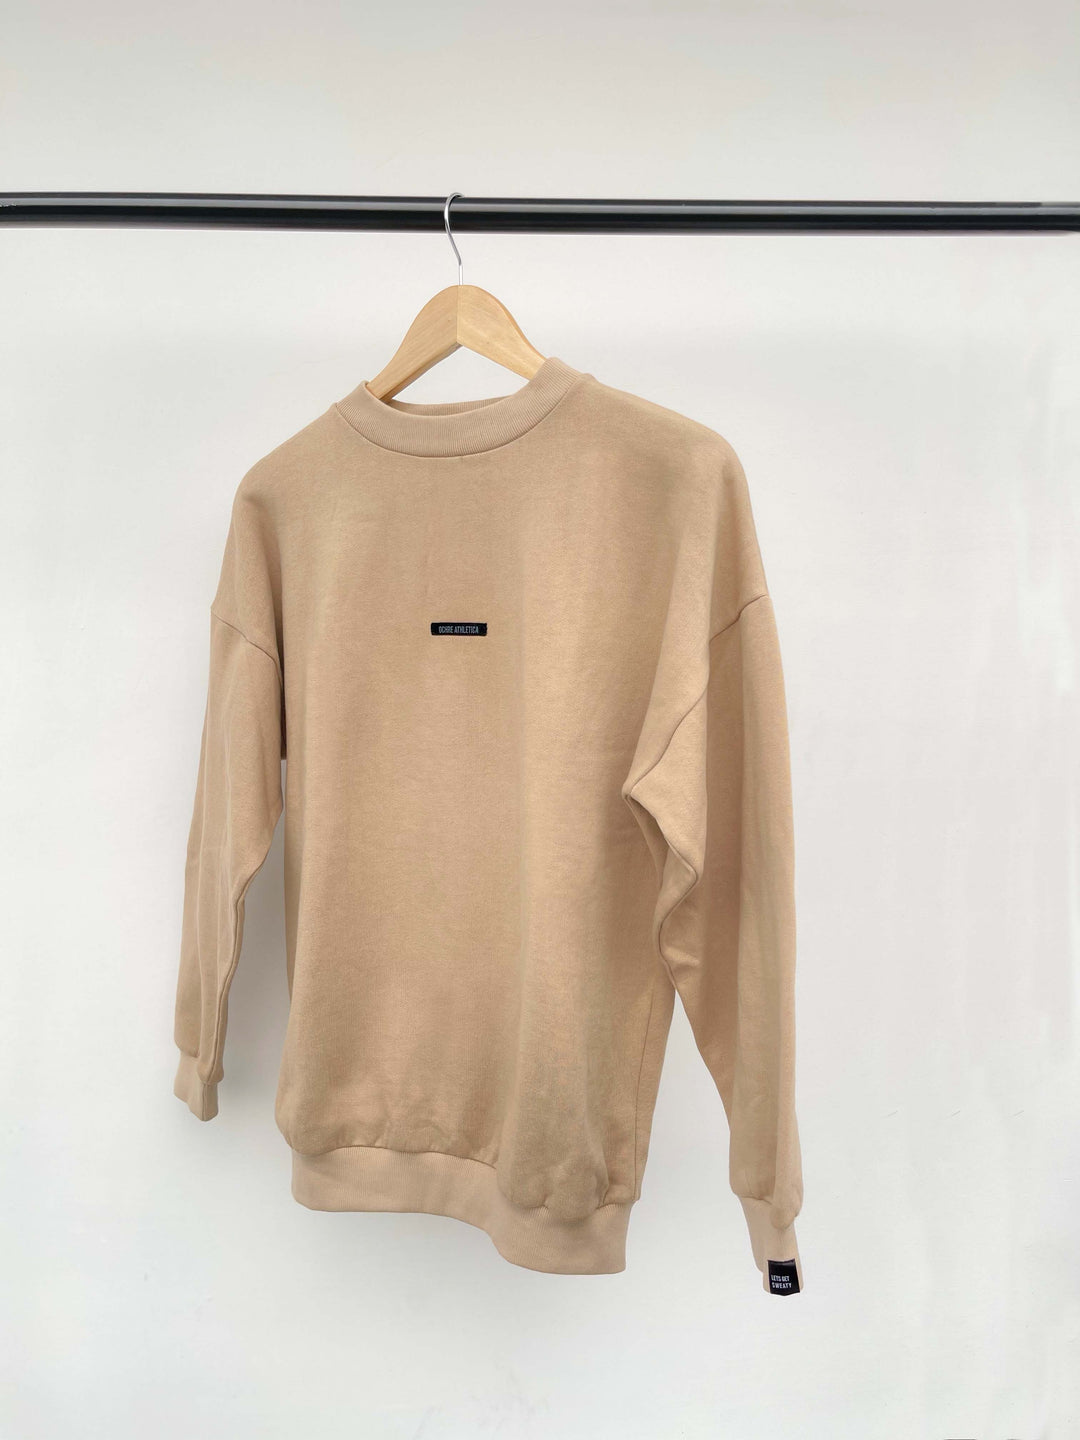 After Hours Sweatshirt in Totally Tan